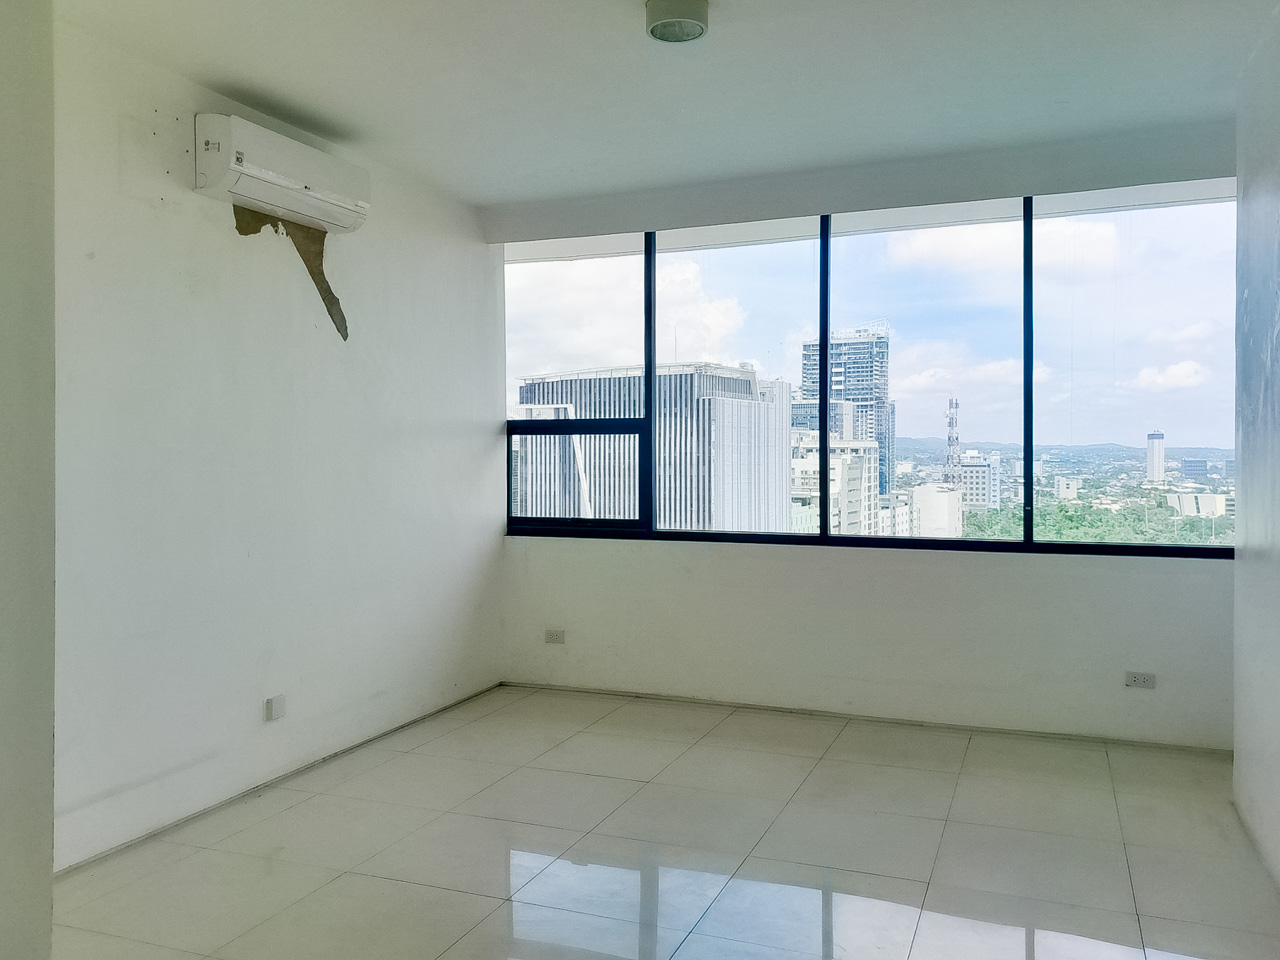 RCPAT3 100 SqM Office Space for Rent in Cebu - 3